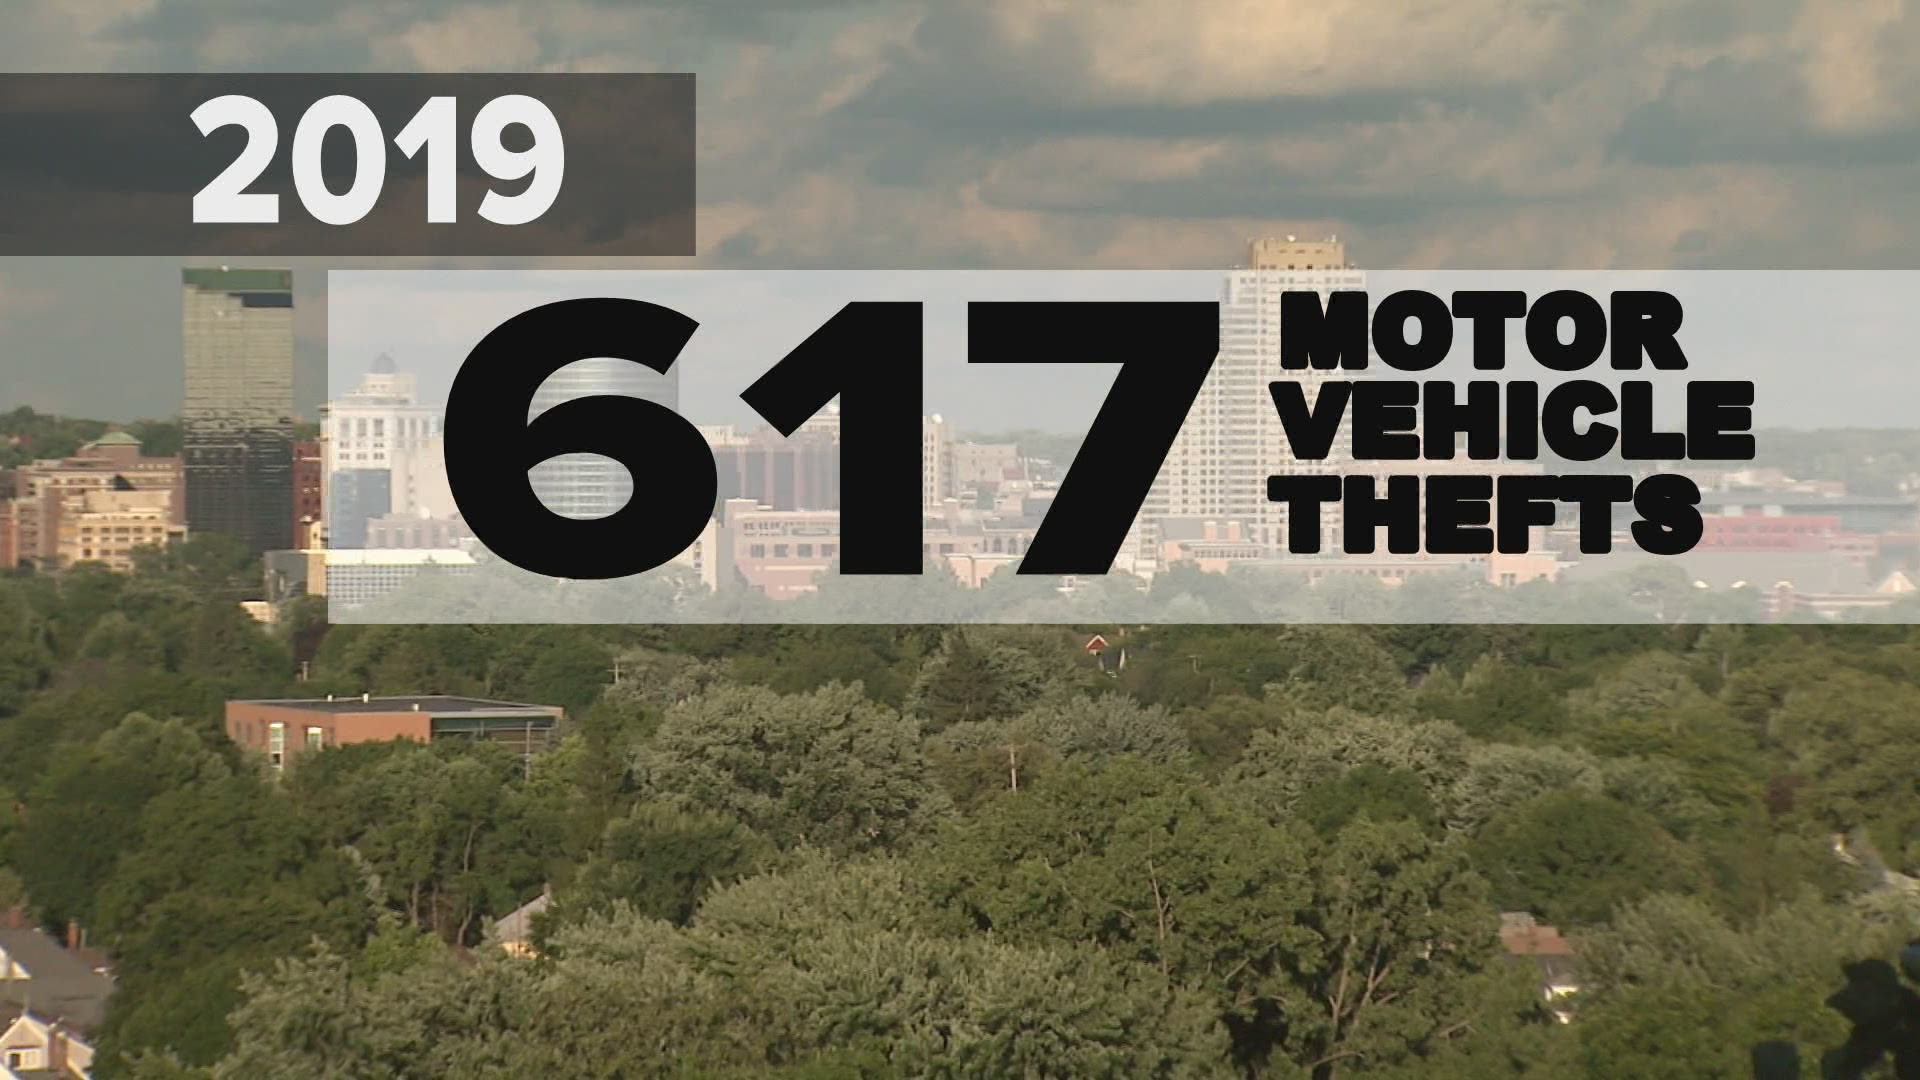 Grand Rapids police reported 803 motor vehicle thefts in 2020; a considerable spike from the previous year and a trend seen across the U.S.